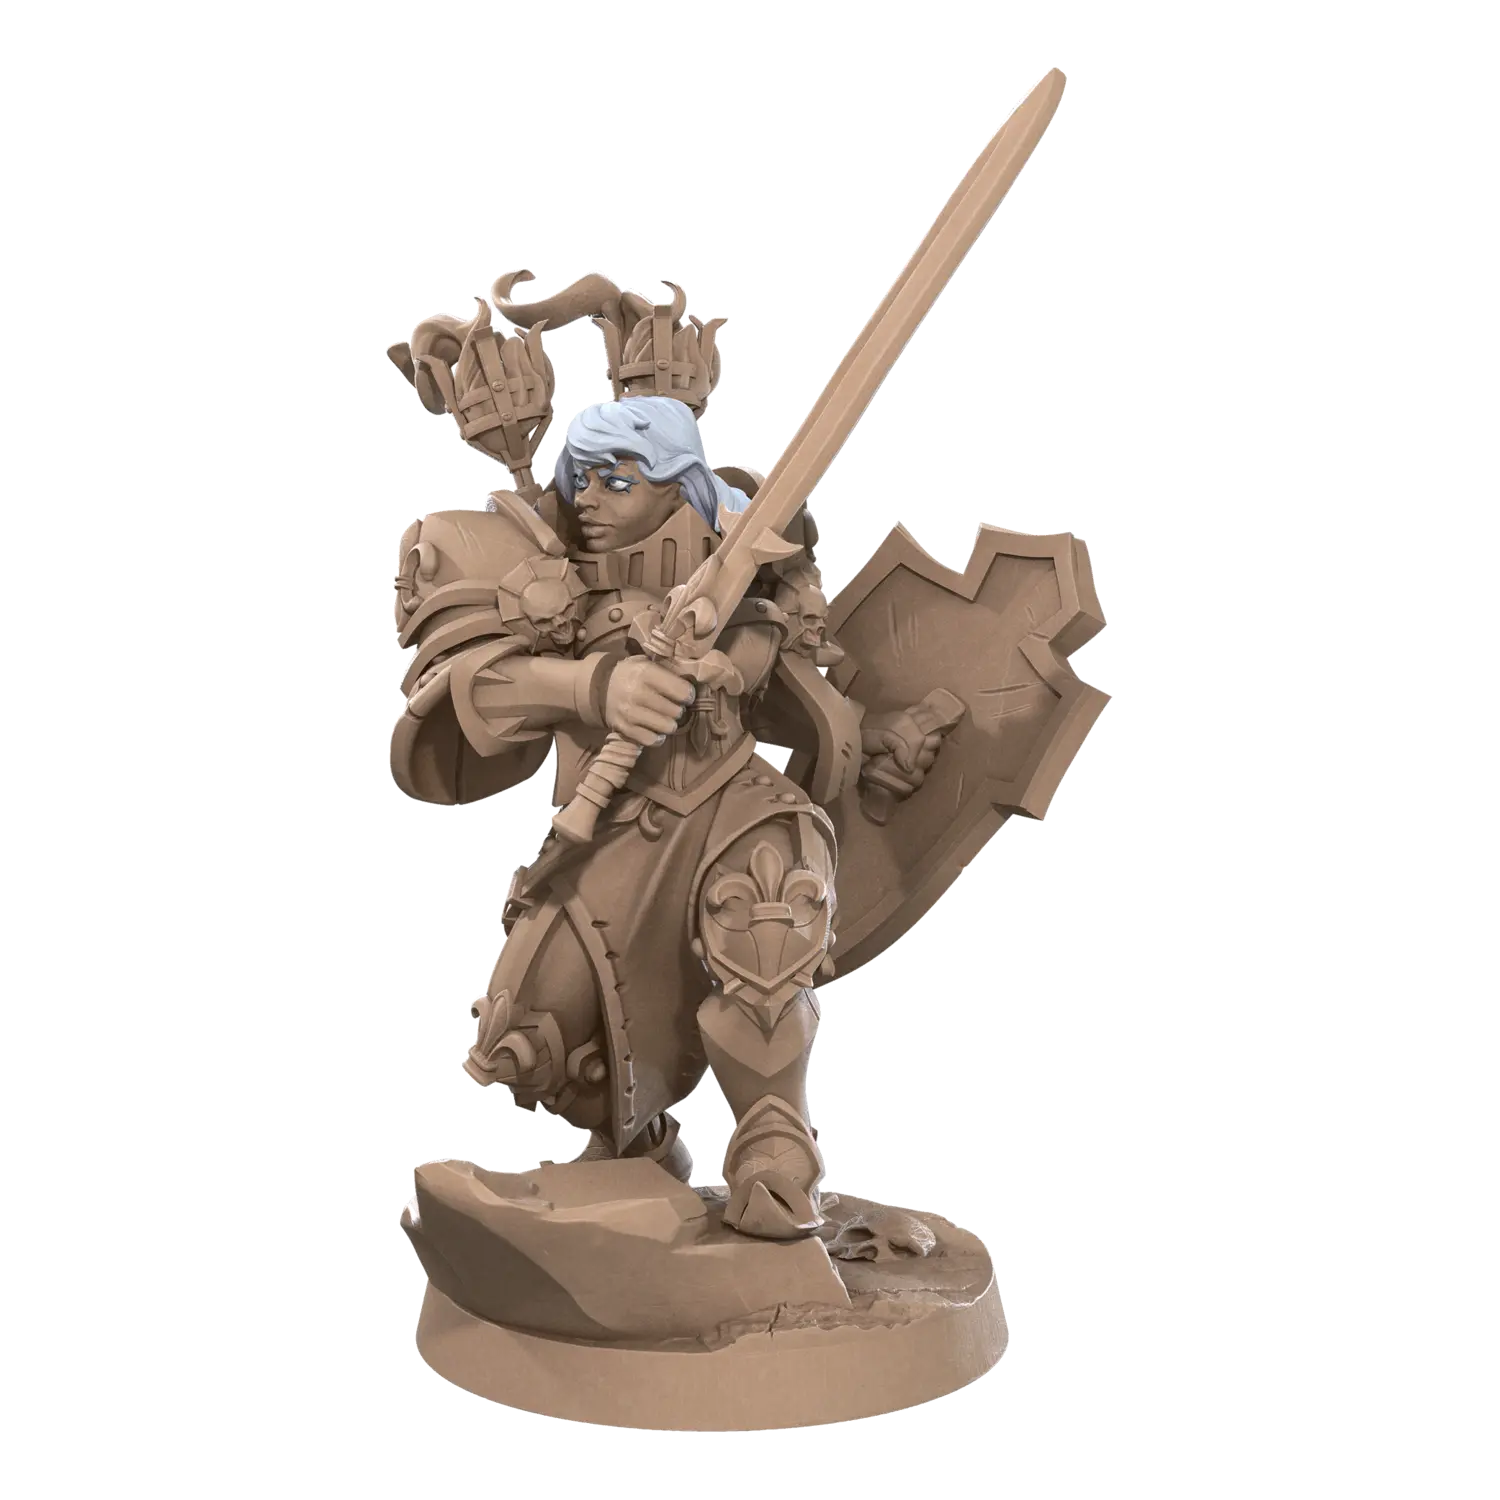 DnD Battle Sisters - Fighter - Human - Miniature - Paladin Cassandra 04 Battle Sisters - Fighter - Human - Miniature - Paladin sold by DoubleHitShop